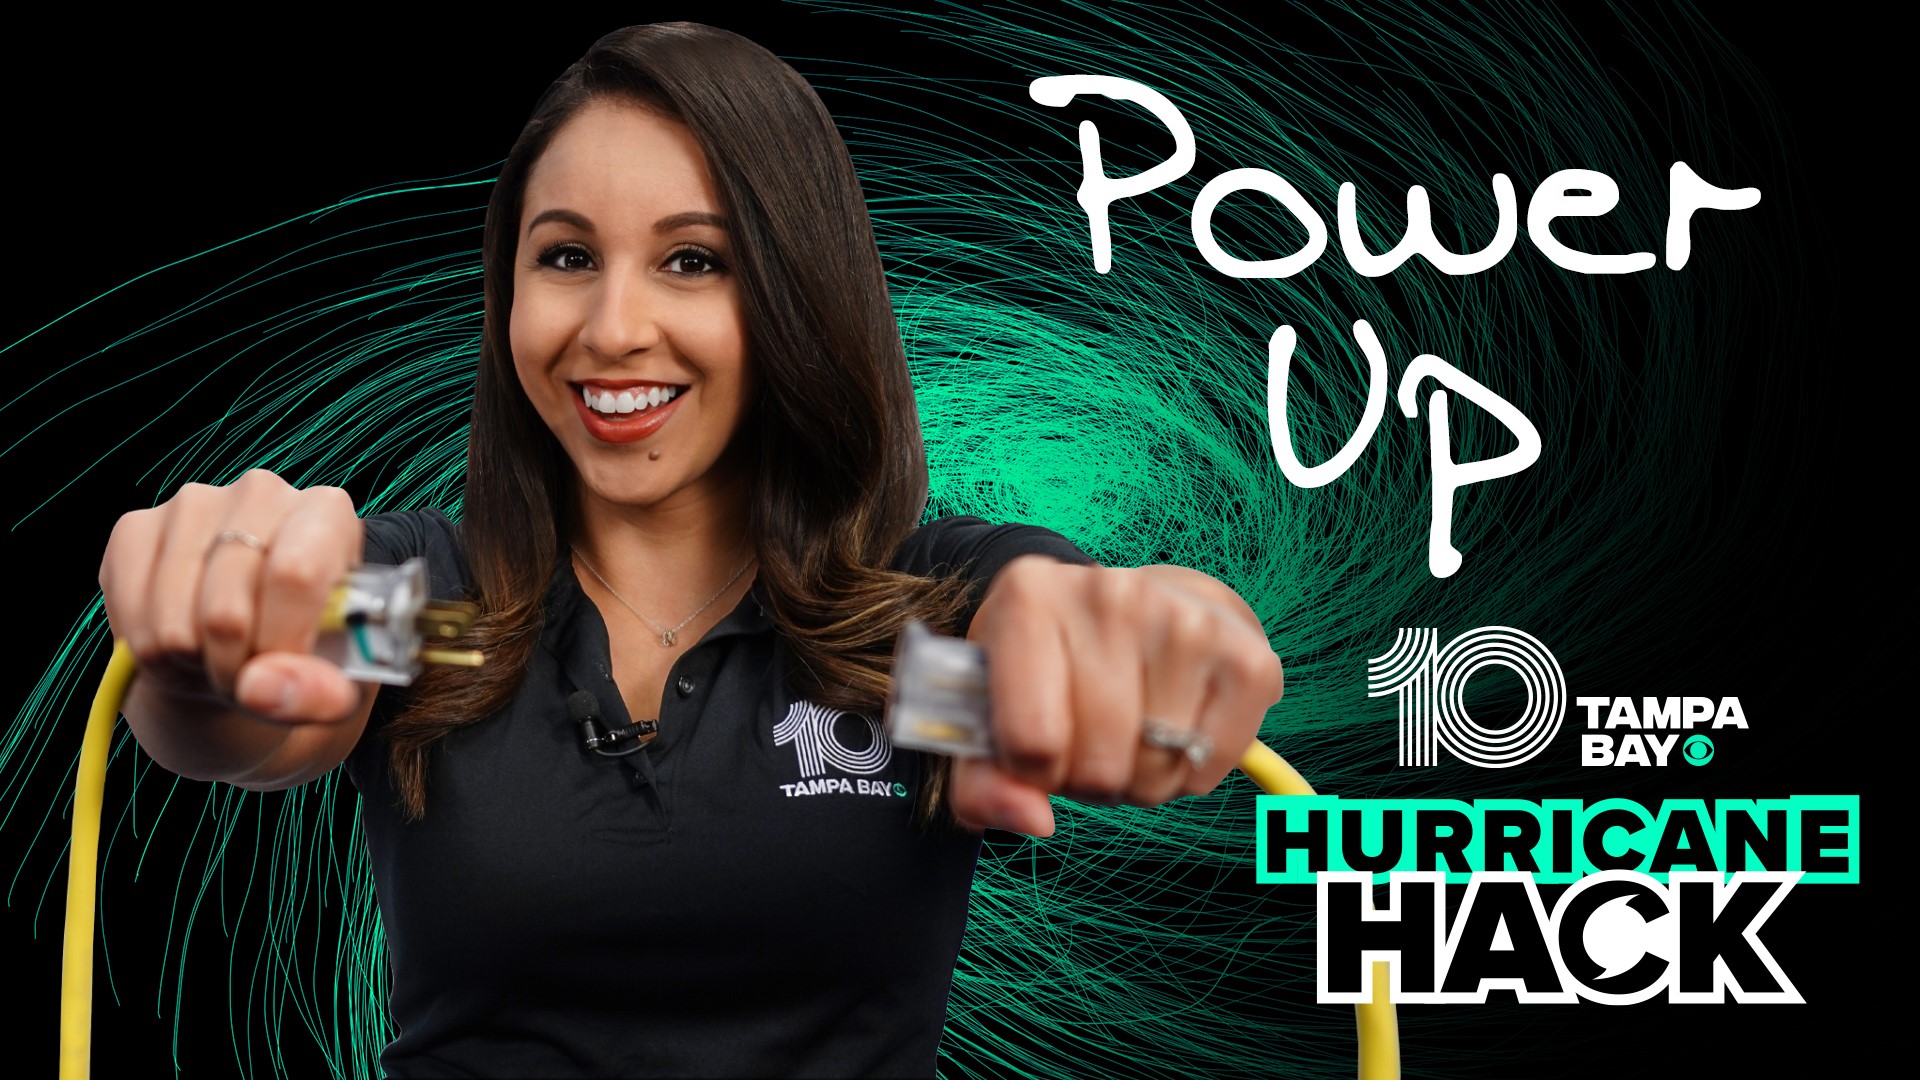 10 Tampa Bay Meteorologist Natalie Ferrari explores everything from portable generators to batteries in our latest Hurricane Hack to protect your family.